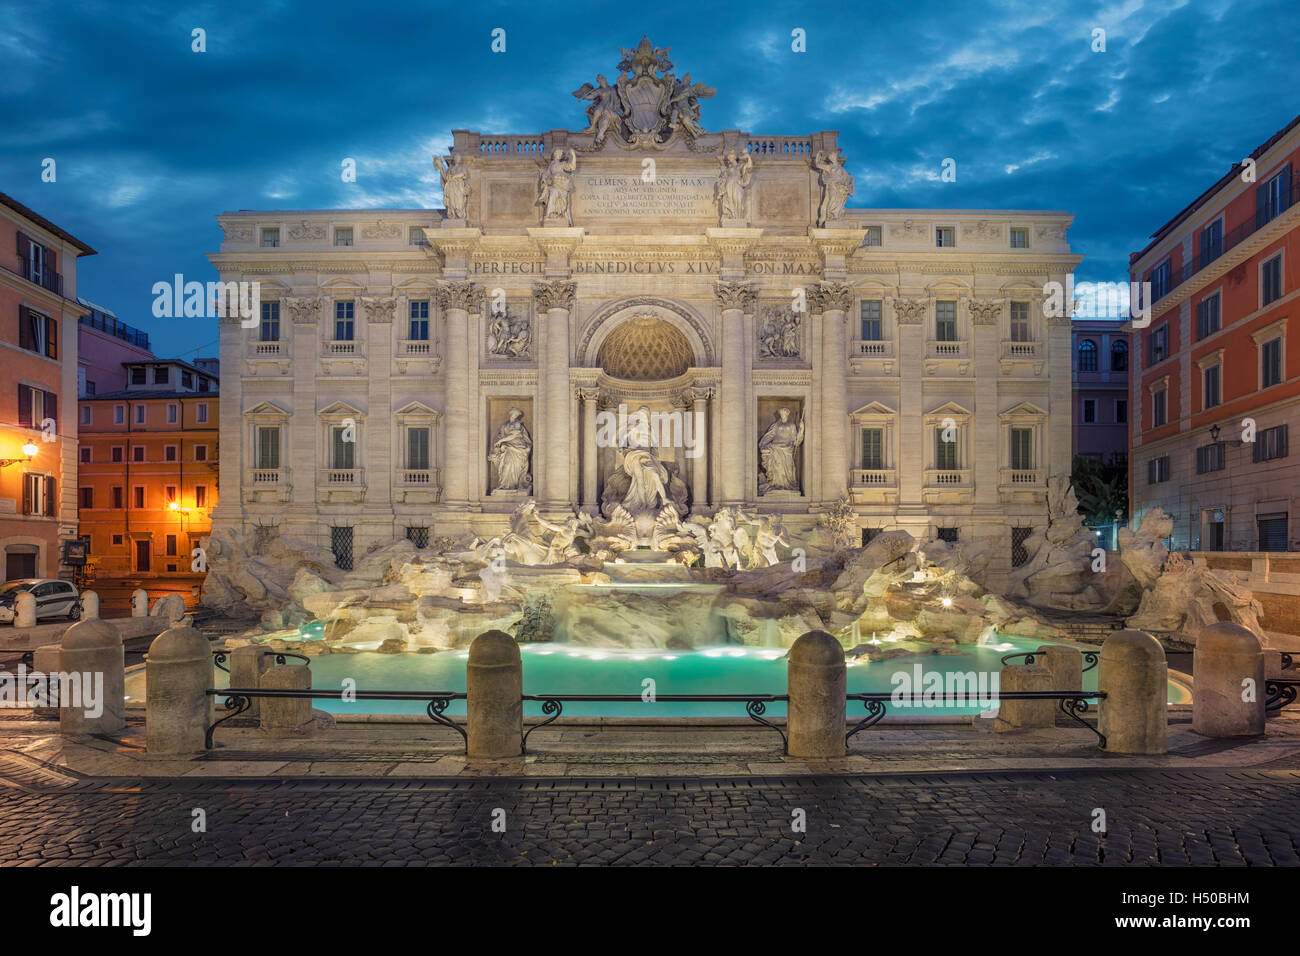 Trevi Fountain, Rome. Image of famous Trevi Fountain in Rome, Italy. Stock Photo